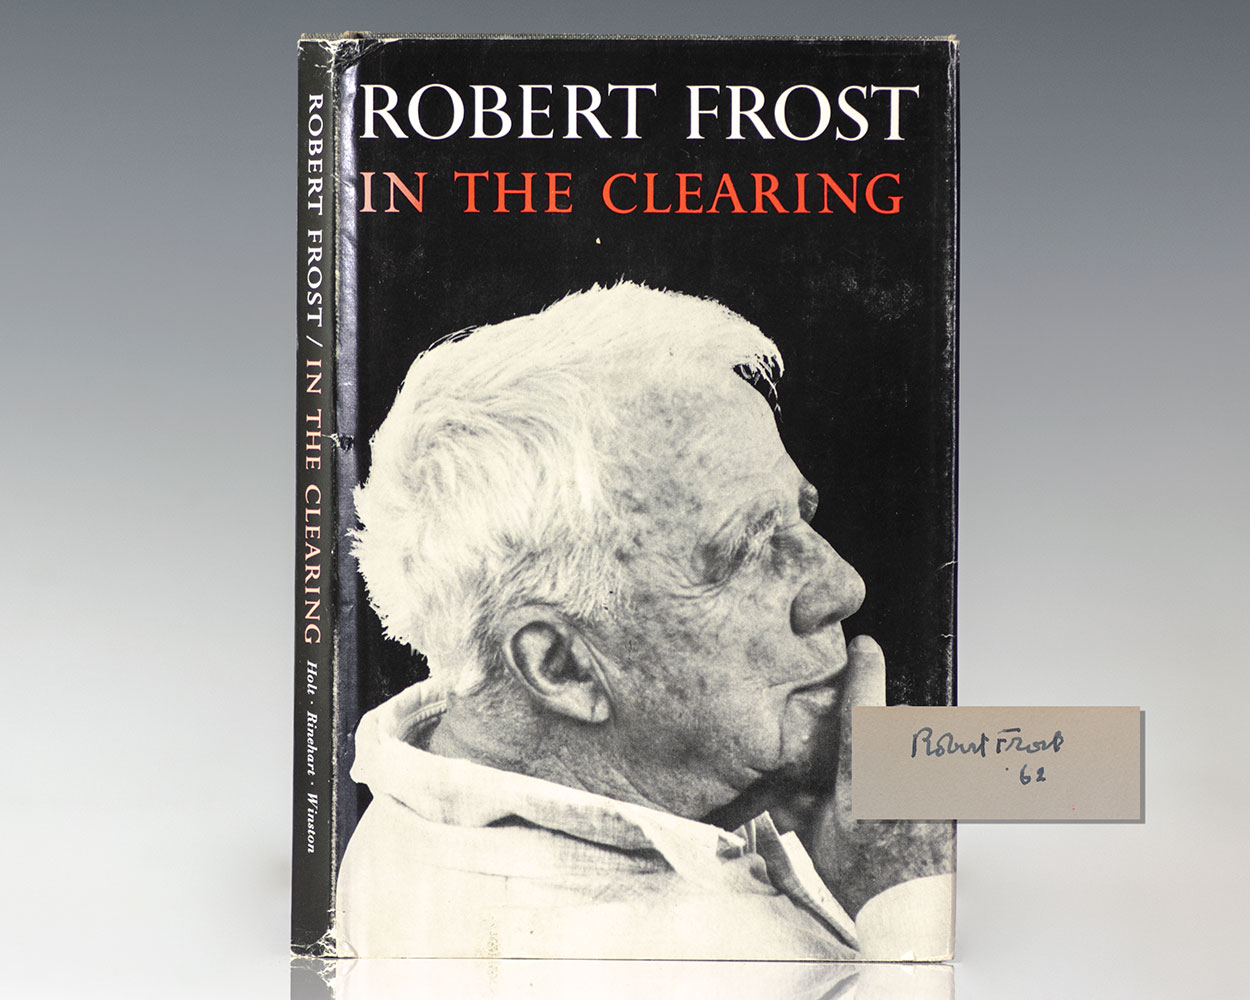 List of poems by Robert Frost - Wikipedia